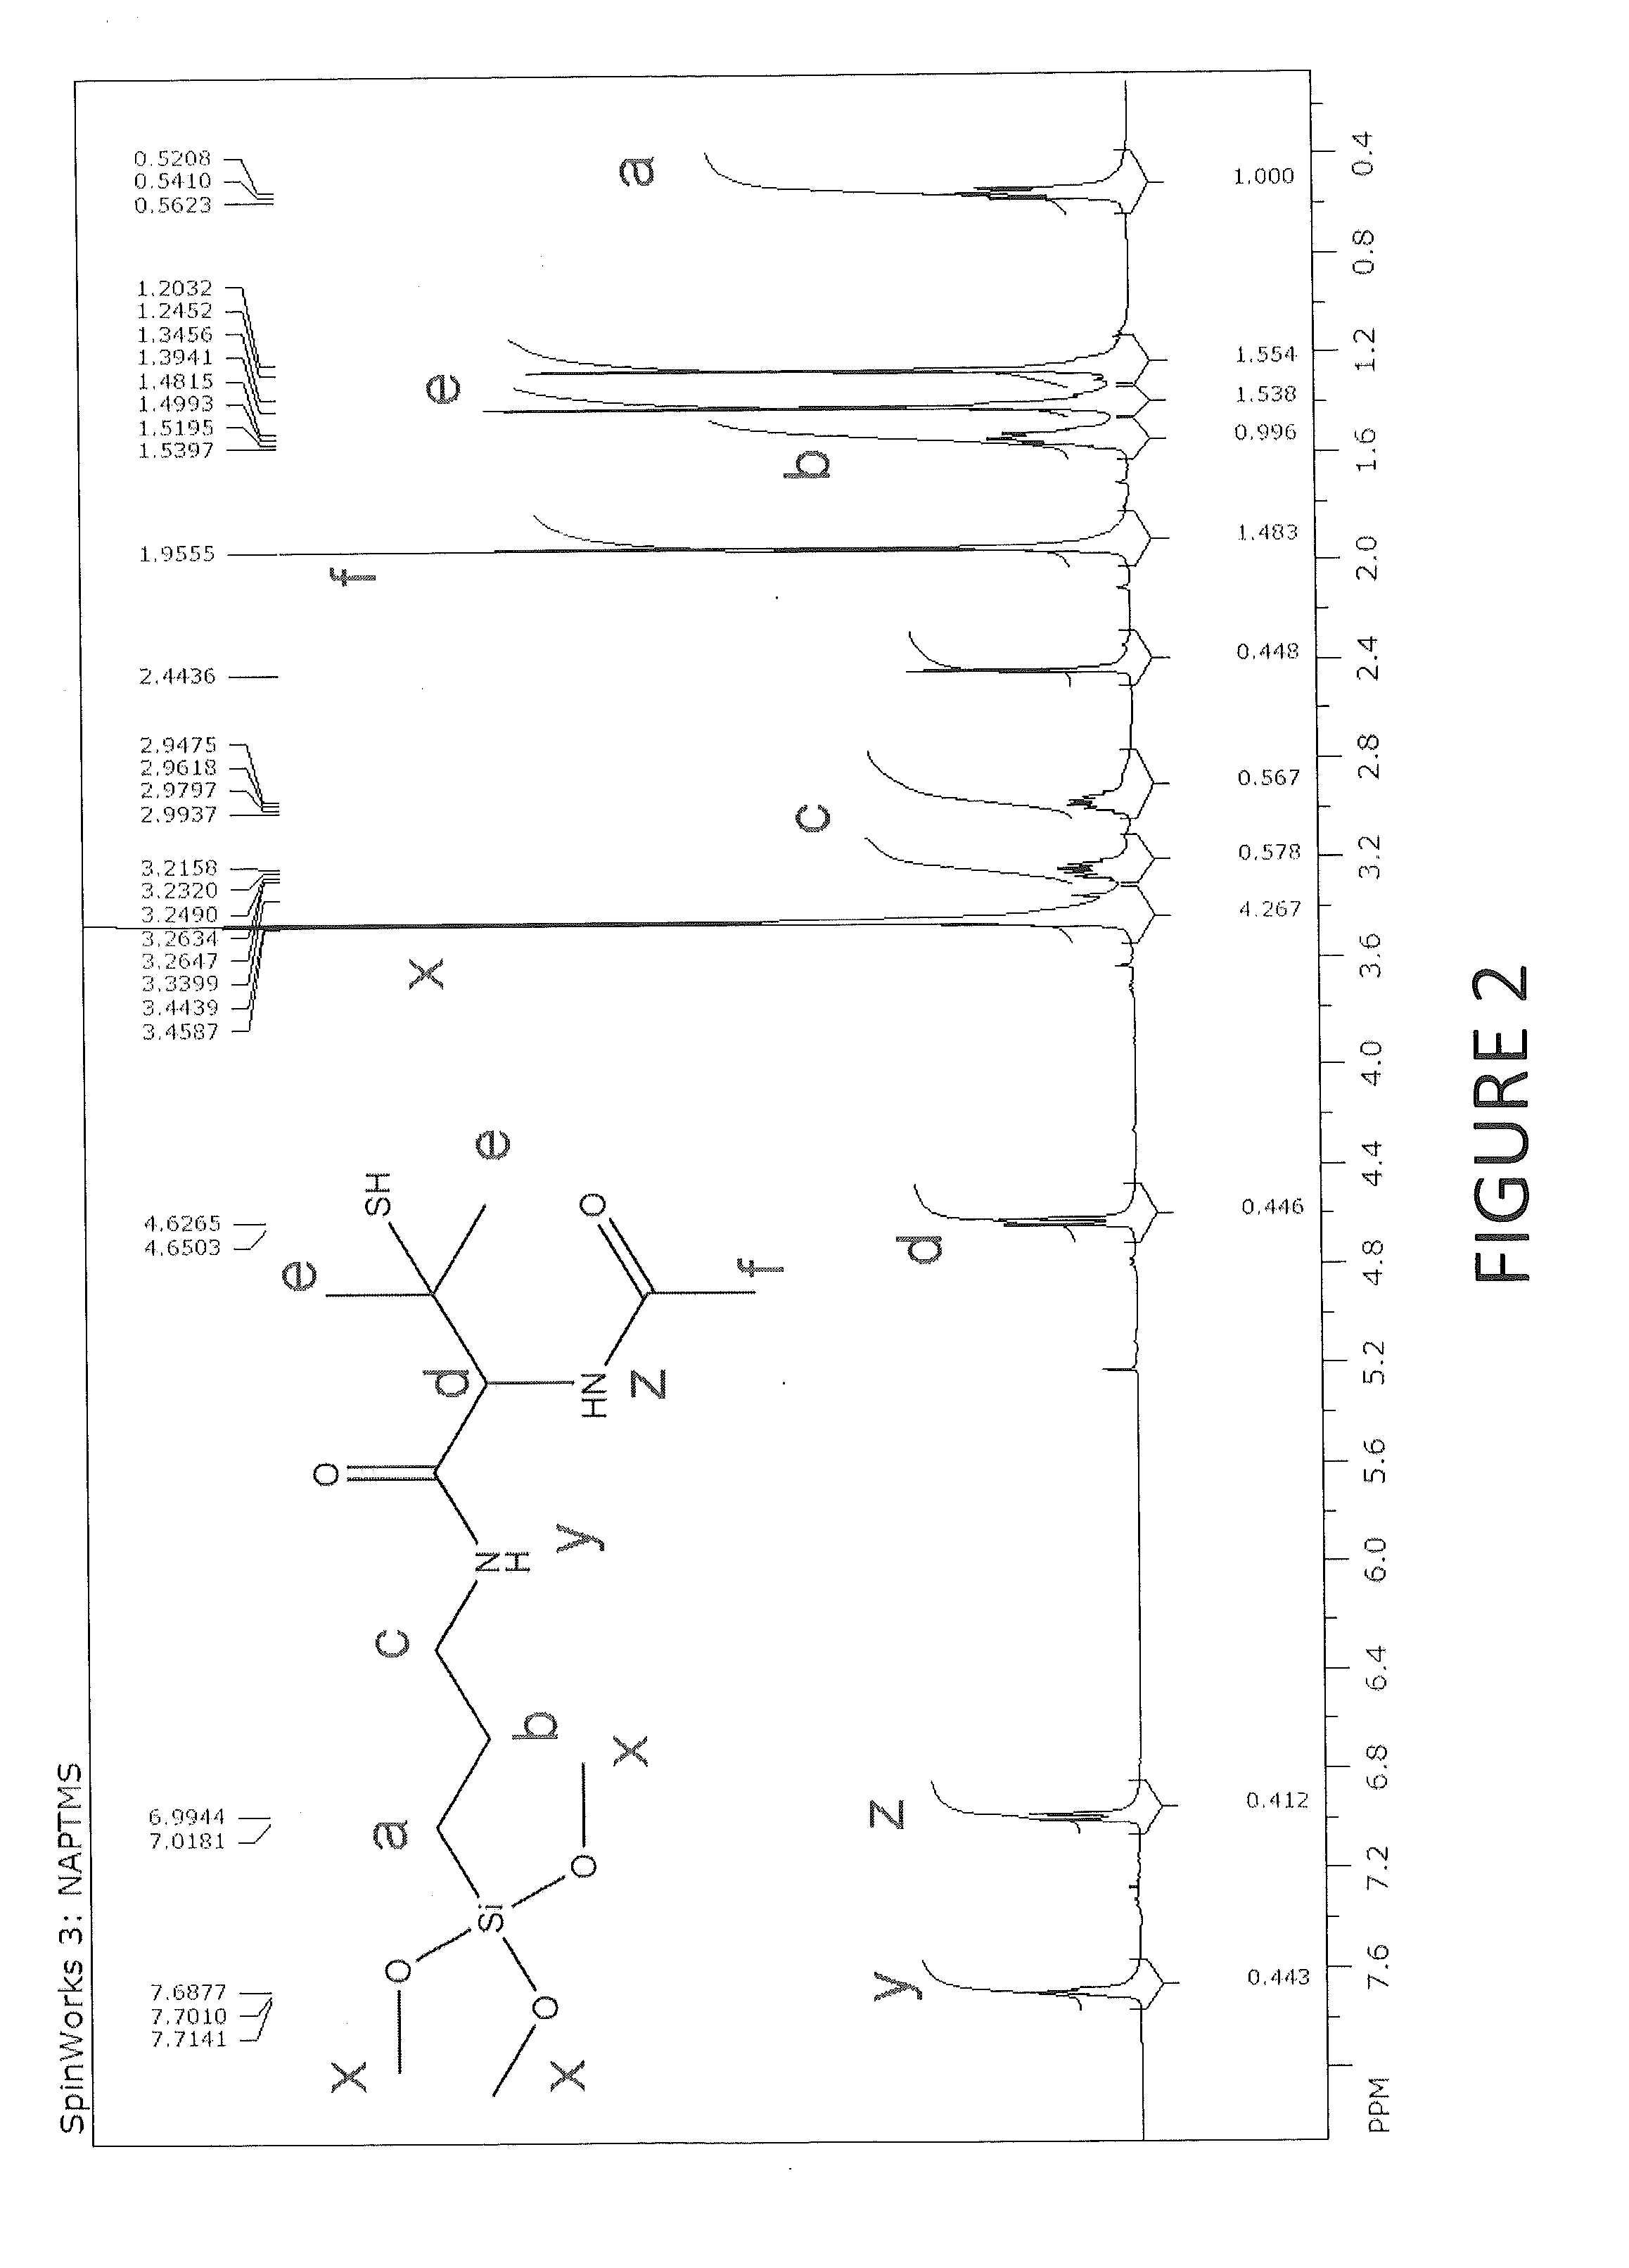 Tertiary s-nitrosothiol-modified nitricoxide-releasing xerogels and methods of using the same